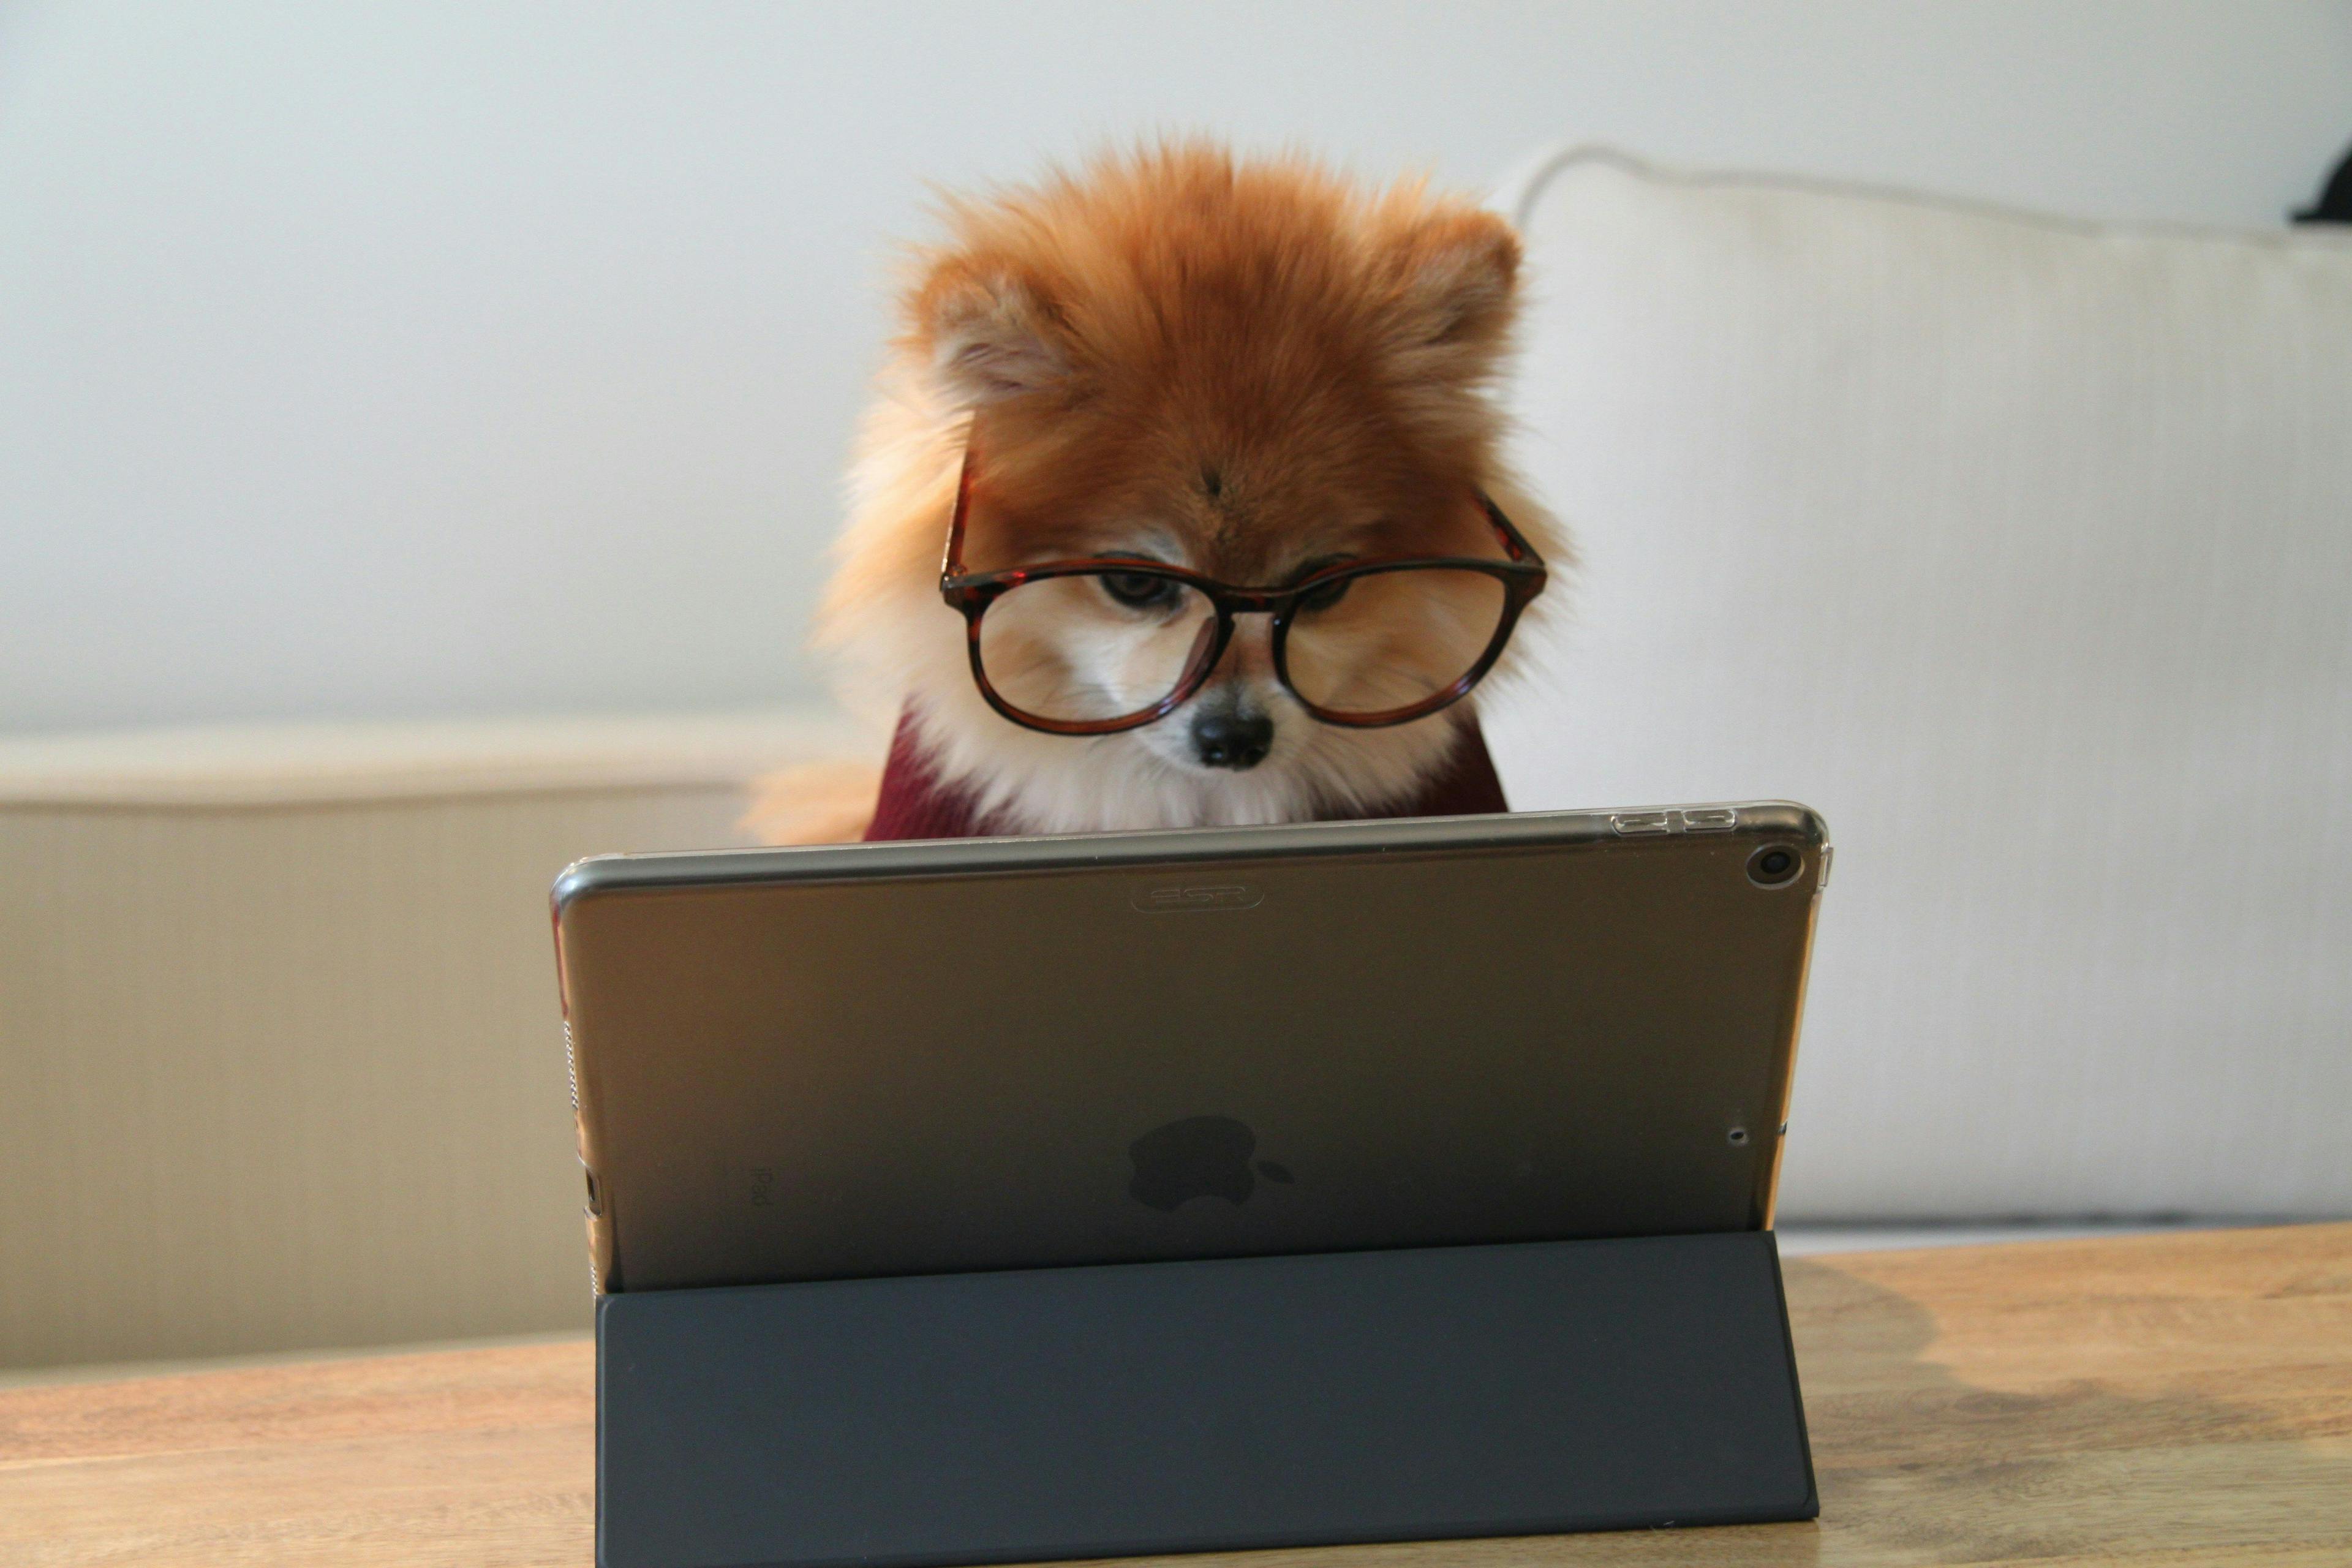 A humorous and adorable image of a small Pomeranian dog wearing oversized round glasses, appearing to be intently looking at the screen of an open tablet on a wooden table. The fluffy, red-haired dog gives the impression of a miniature scholar or a busy professional caught in the midst of work, adding a whimsical touch to the tech-savvy scene.